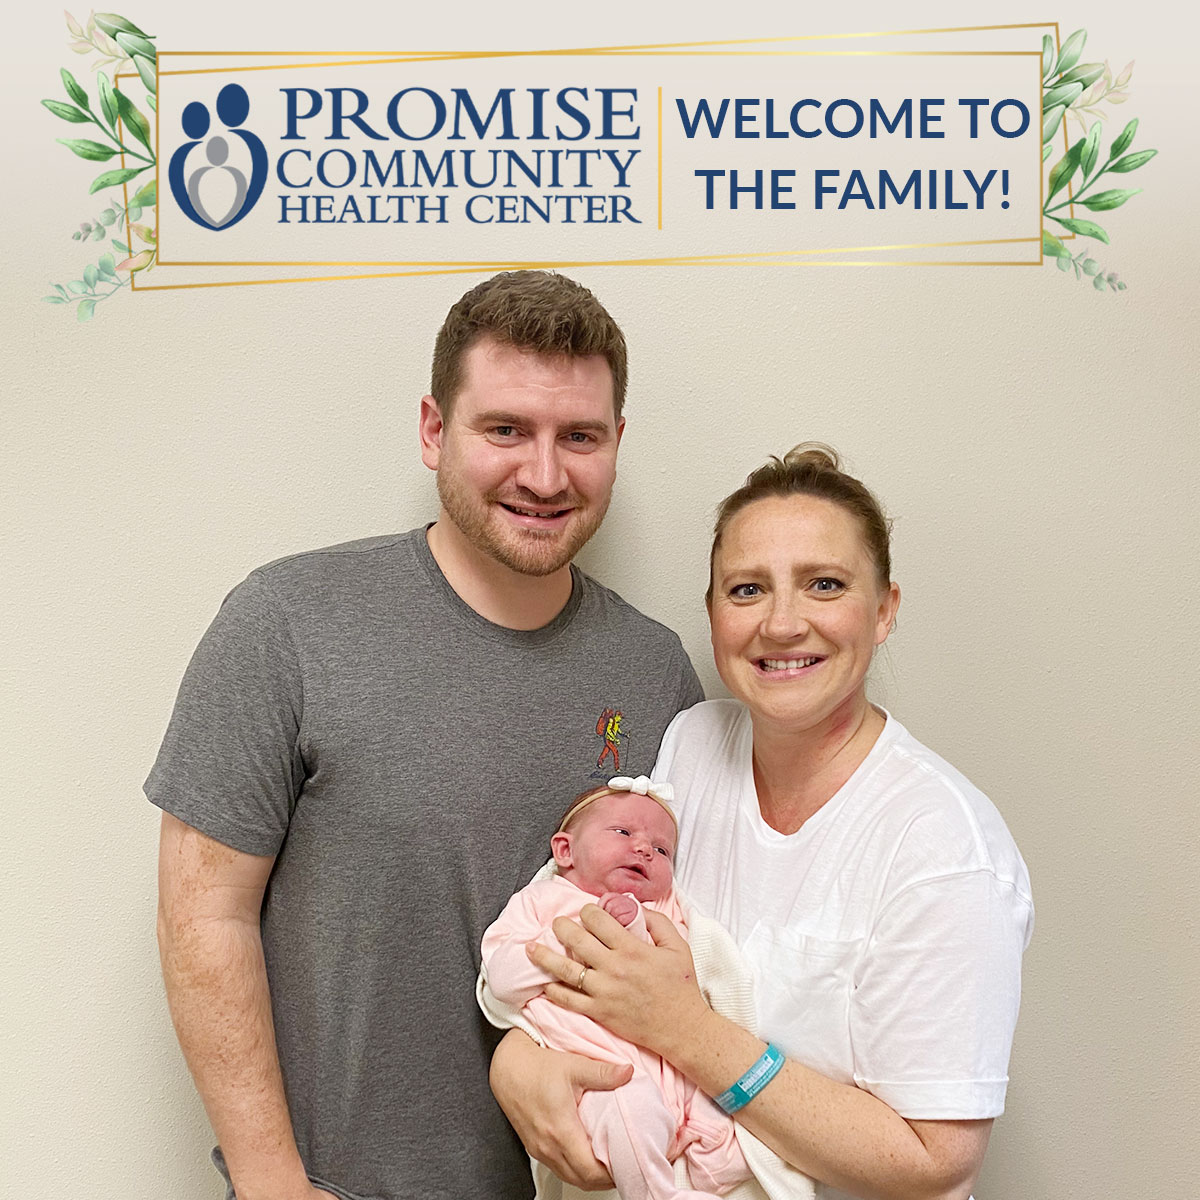 Van Otterloo Family | Promise Community Health Center in Sioux Center, Iowa | Home births in northwest Iowa, Home births in southeast South Dakota, Home births in southwest Minnesota | Home births in Sioux Falls South Dakota, Home births in Beresford South Dakota, Home births in Sioux City IA, Home births in LeMars IA, Home births in Worthington MN, Home births in Iowa, Home births in South Dakota, Home births in Minnesota